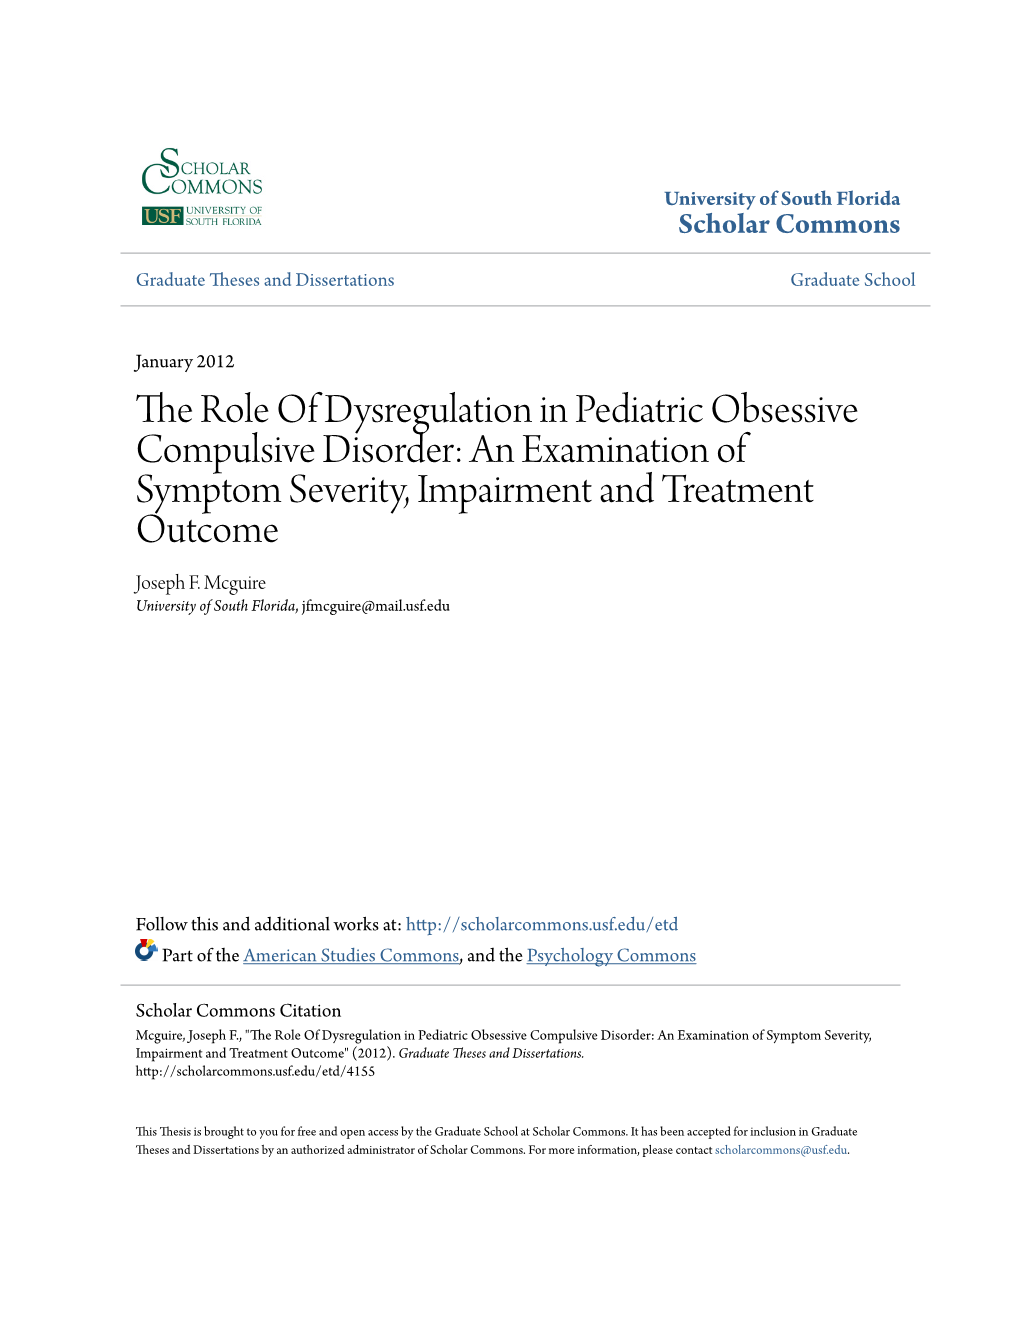 The Role of Dysregulation in Pediatric Obsessive Compulsive Disorder: an Examination of Symptom Severity, Impairment and Treatment Outcome Joseph F